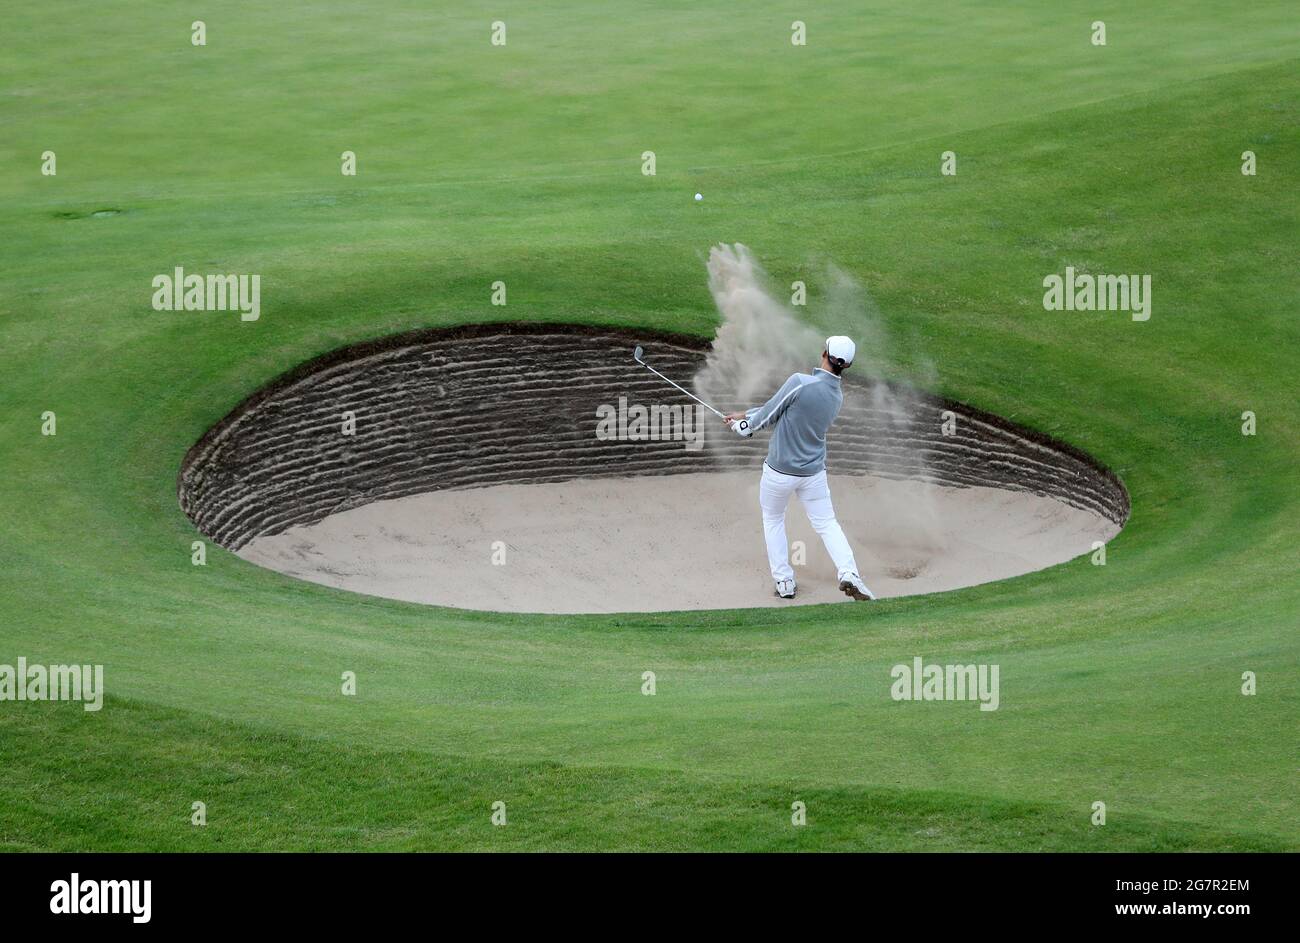 Thailand's Jazz Janewattananond chips out of a bunker during day two of The Open at The Royal St George's Golf Club in Sandwich, Kent. Picture date: Friday July 16, 2021. Stock Photo